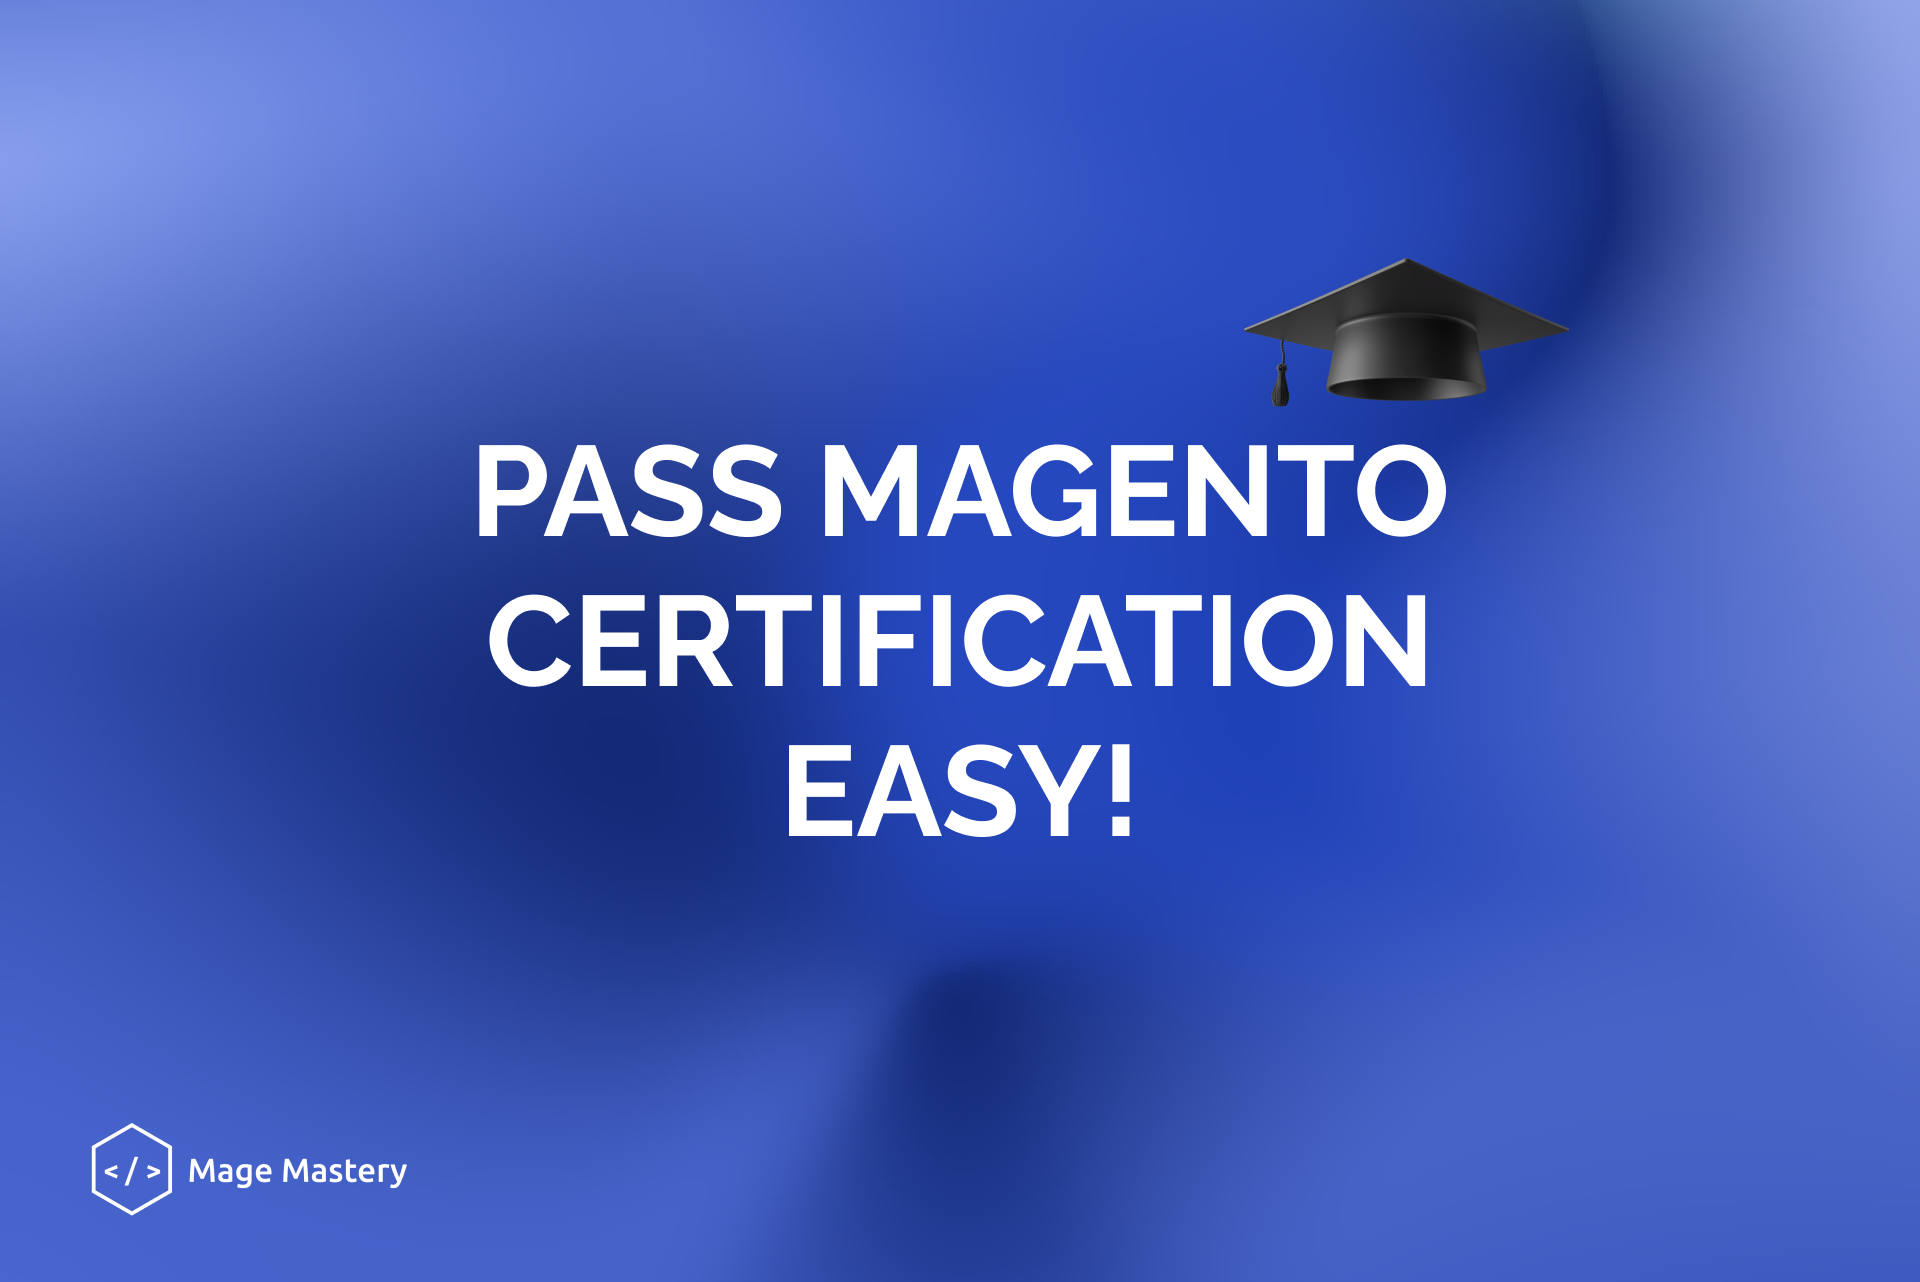 How to get Magento certification?